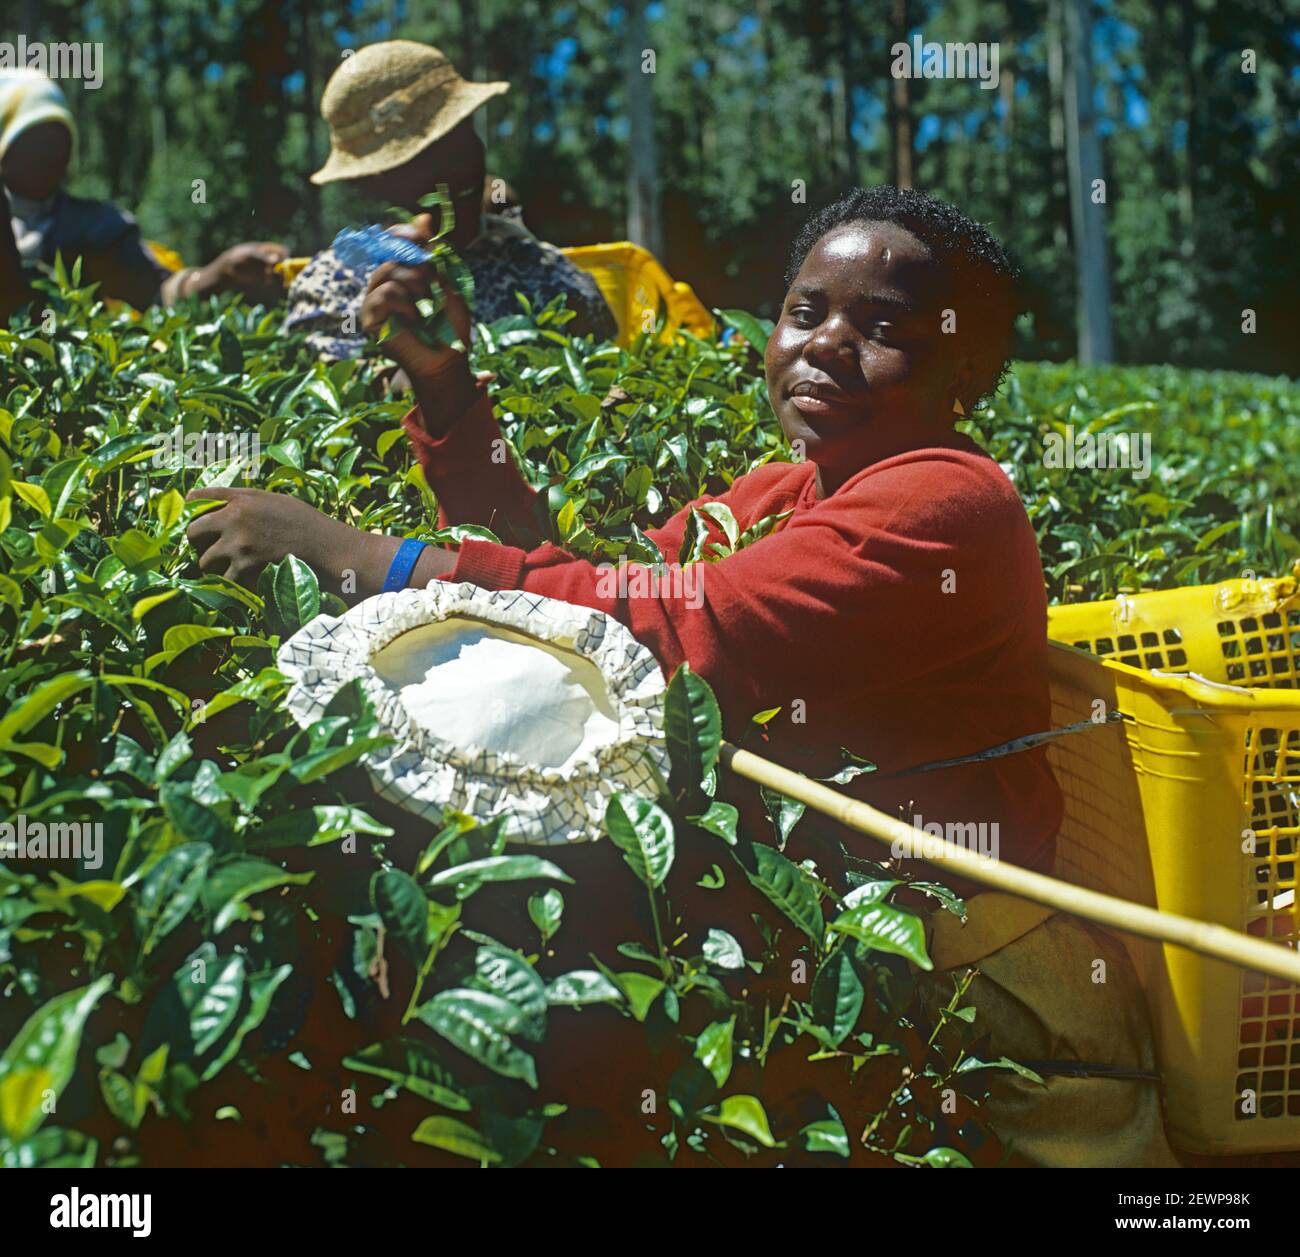 Black girl, hat discarded, picking tea, leaves and collecting in a plastic basket on her back on a Transvaal Estate, in the low Veldt of South Africa, Stock Photo